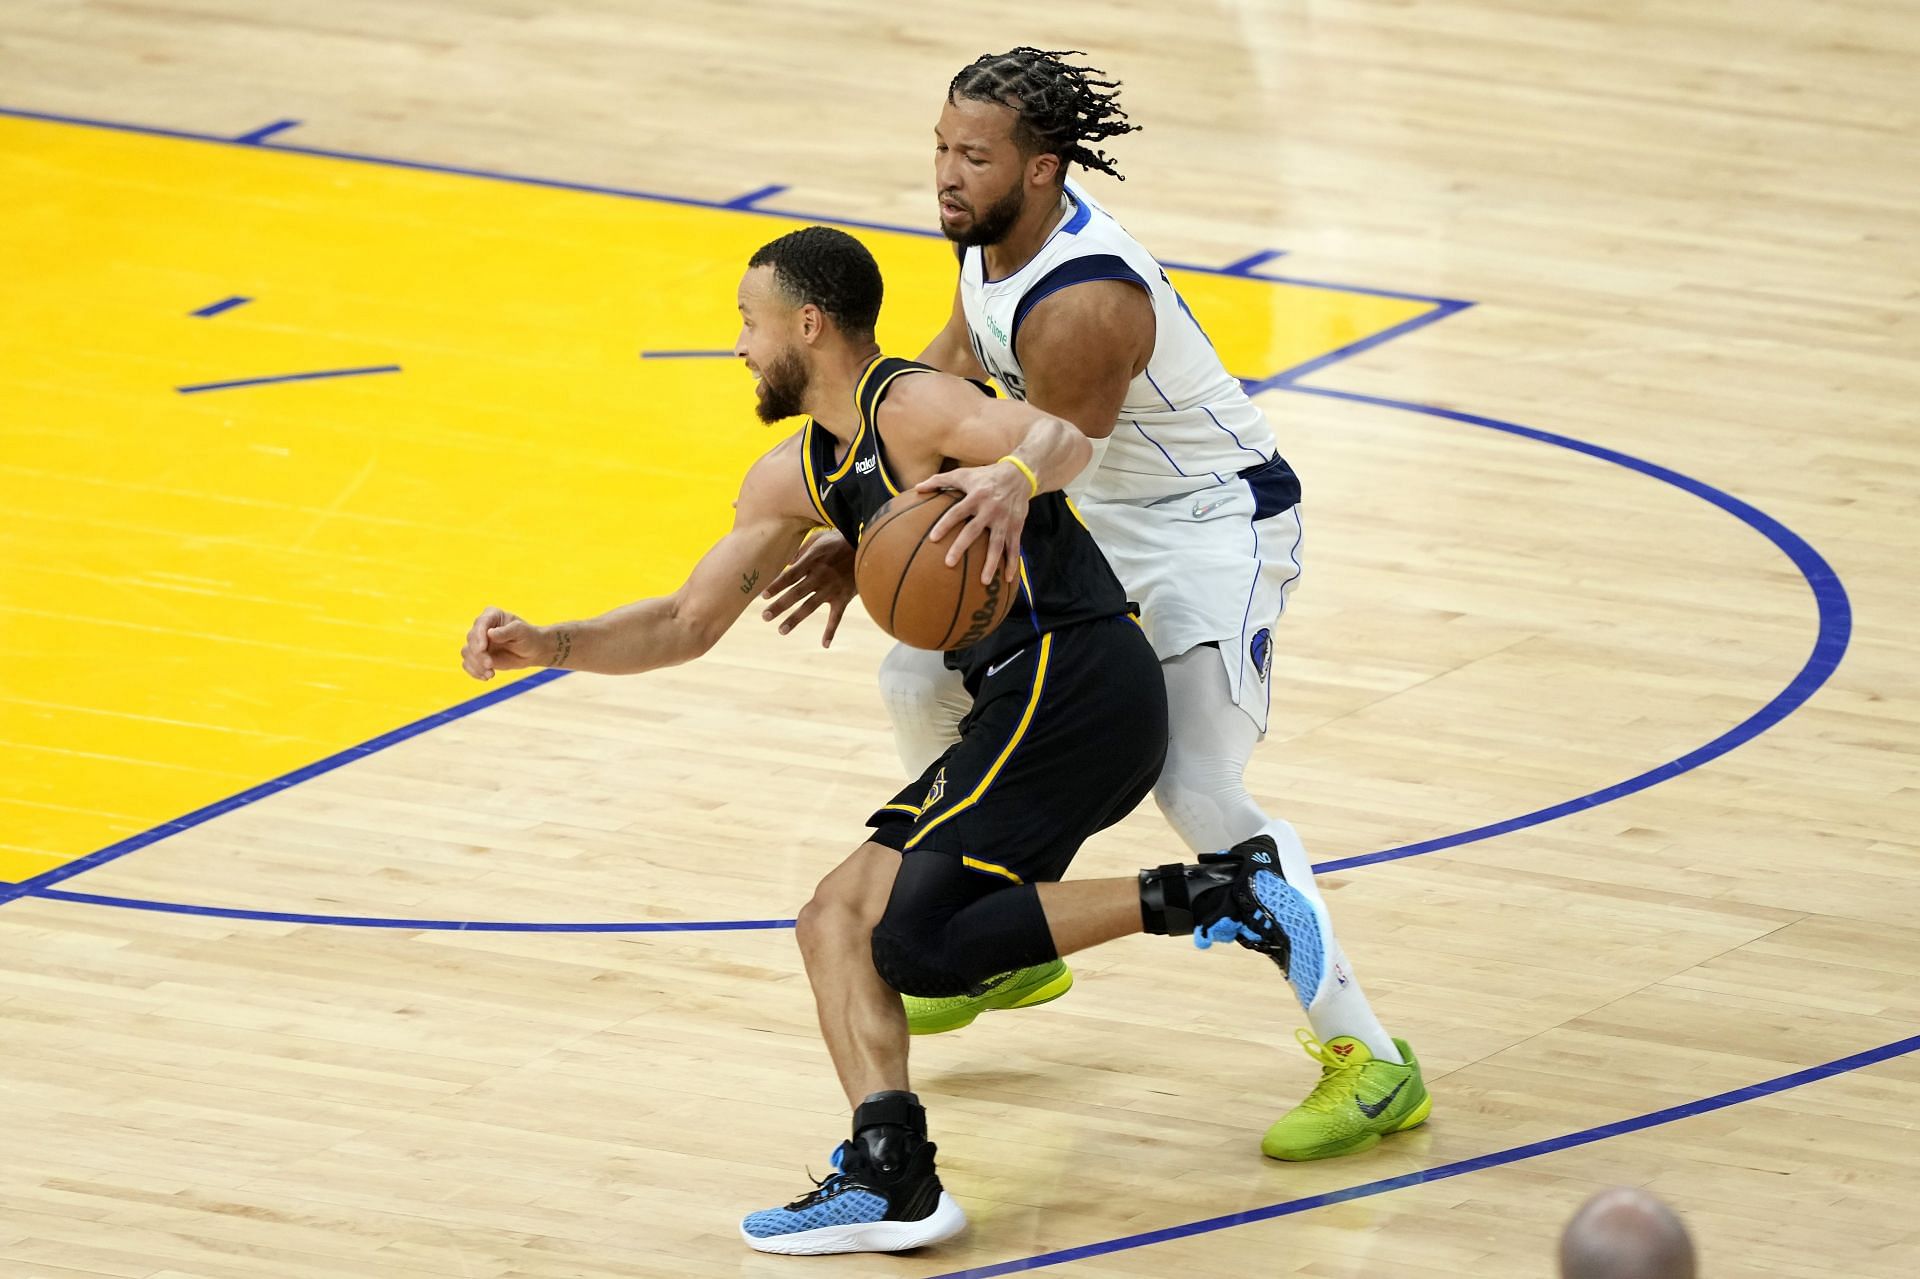 Steph Curry of the Golden State Warriors drives against Jalen Brunson of the Dallas Mavericks.